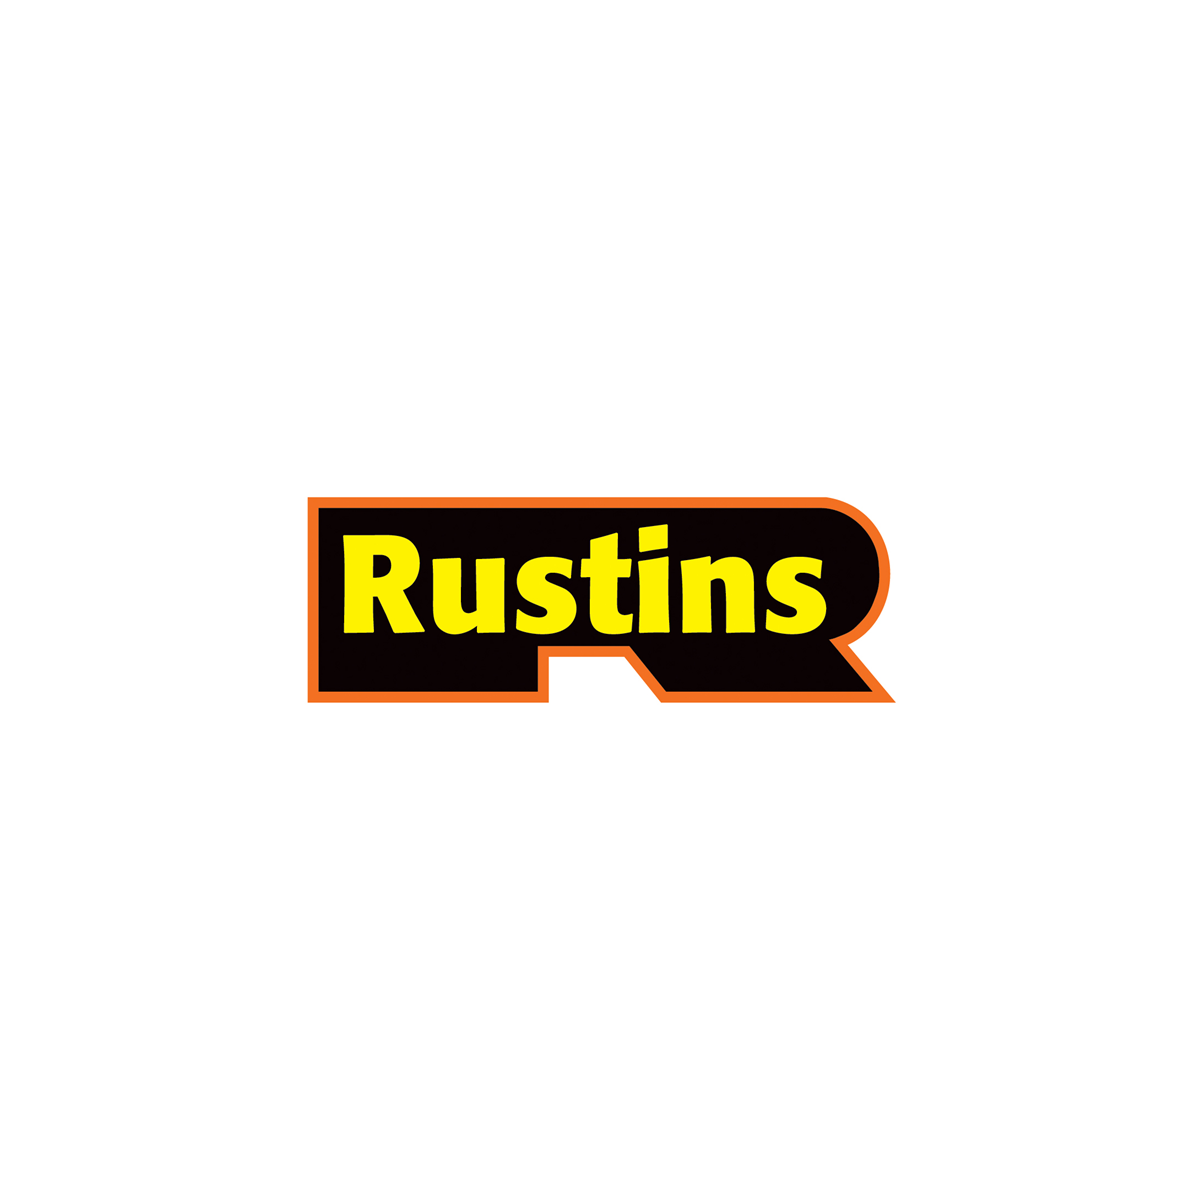 Where to Buy Rustins Products Online